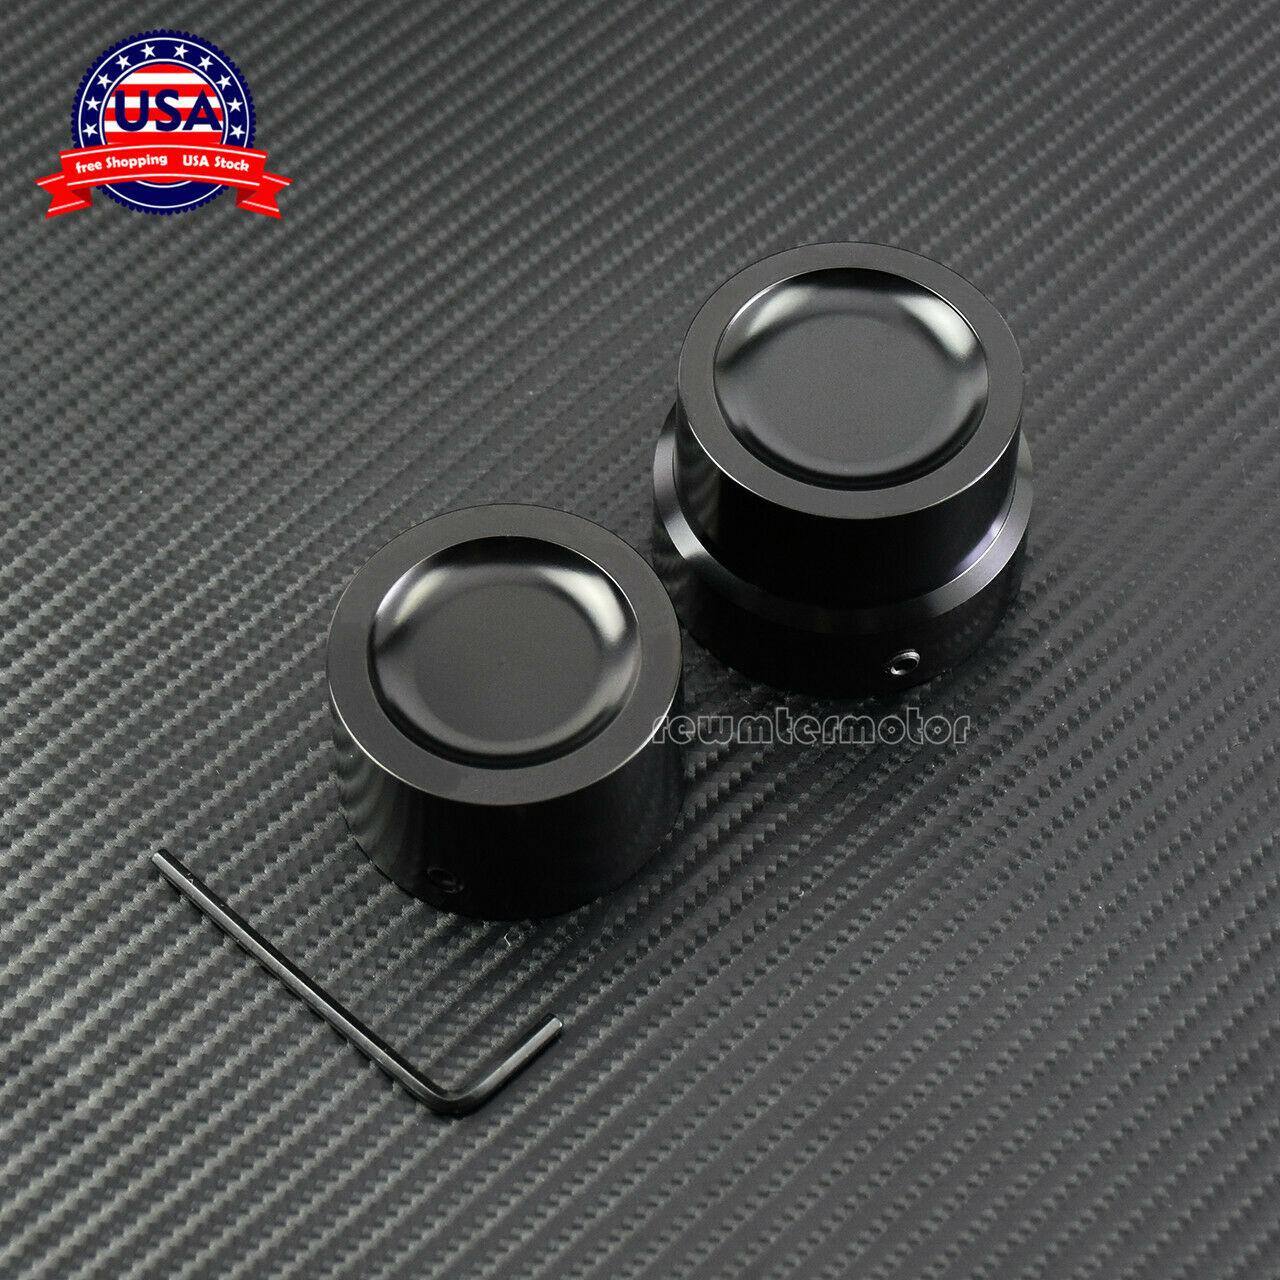 Rear Axle Nut Cover Cap Fit For Dyna Super Glide 08-17 Heritage Softail 08-19 - Moto Life Products